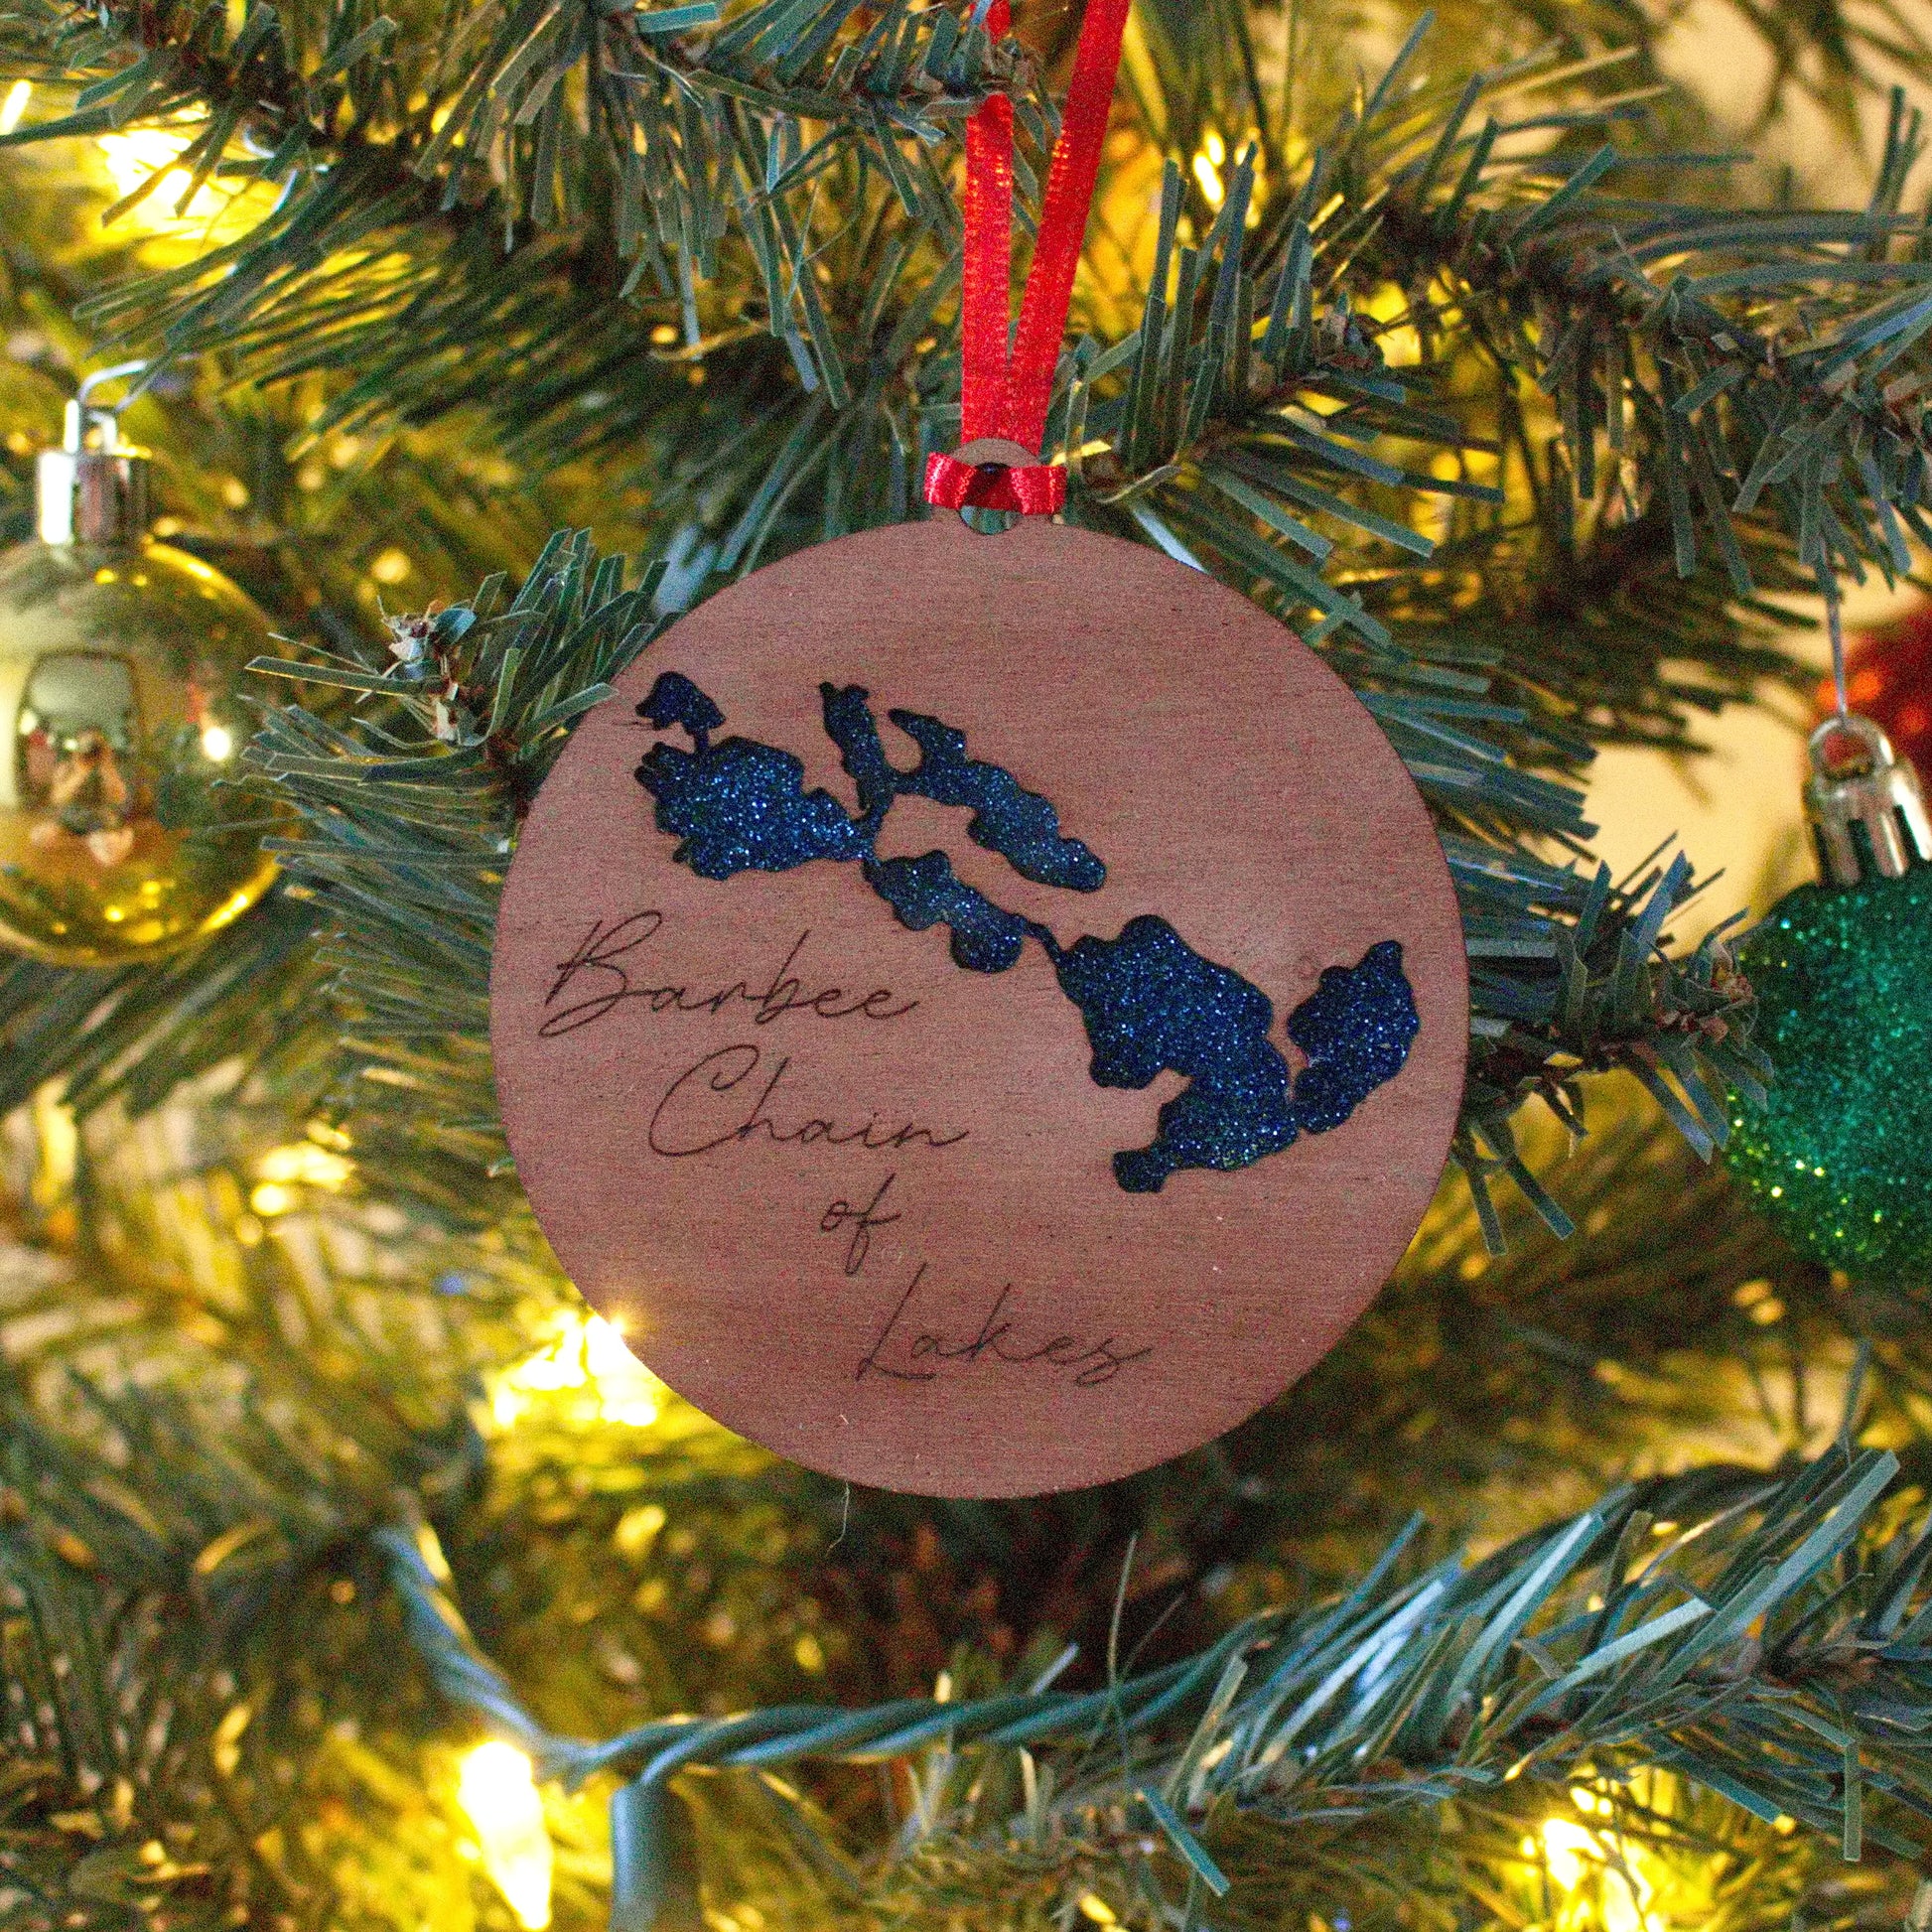 Barbee Chain of Lakes Christmas ornament for the family to remember time spent together on the lake. Made out of wood and acrylic with attention to detail. This is something you will love.